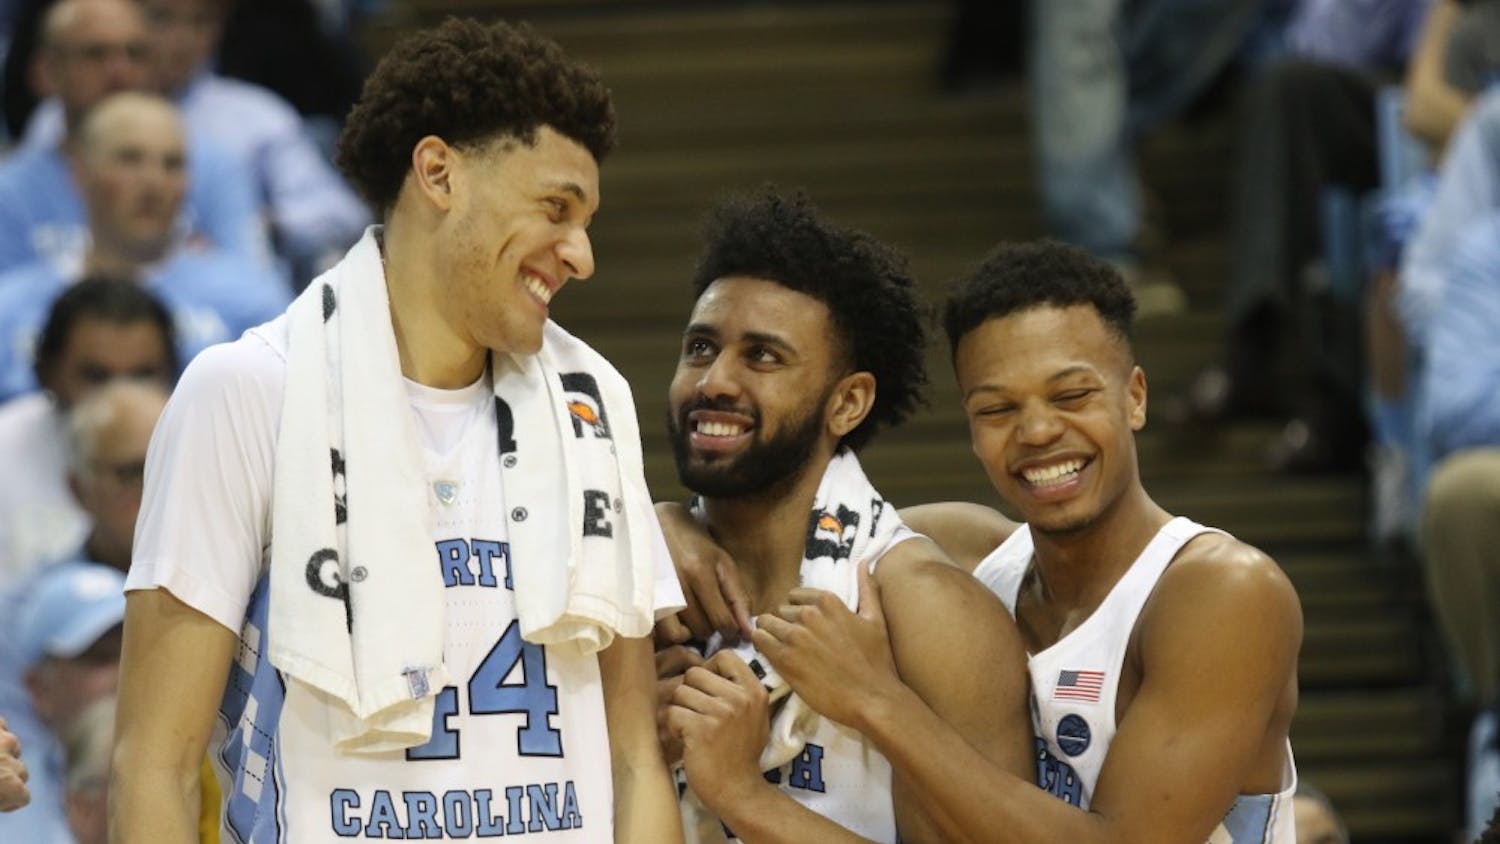 North Carolina players Justin Jackson (44), Joel Berry (2) and Nate Britt (0) are all smiles after the men's basketball team's victory over Duke on Saturday night.